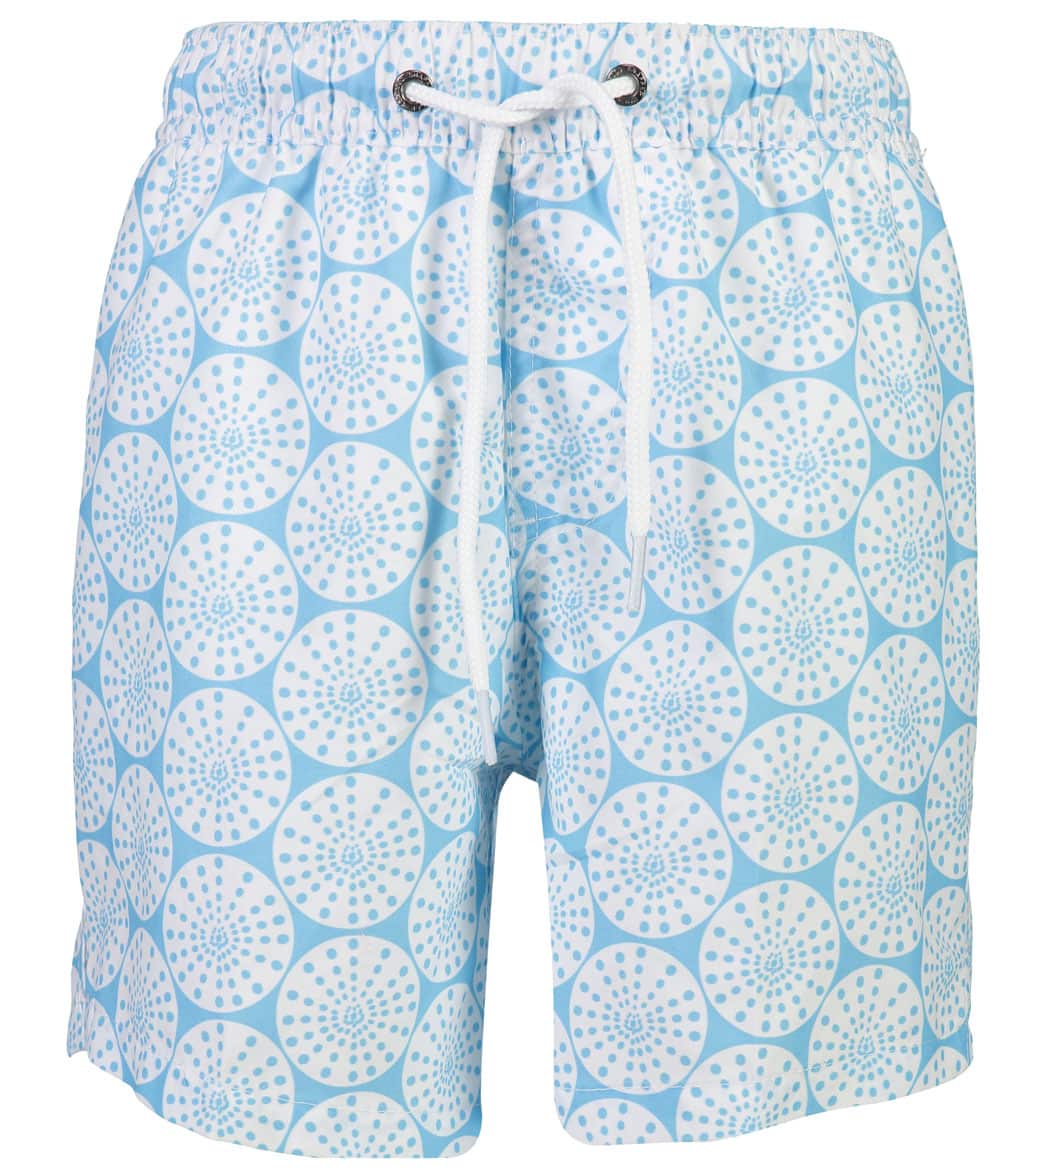 Snapper Rock Boys' Oceania Sustainable Boardshorts Toddler//Big Kid - 6 - Swimoutlet.com